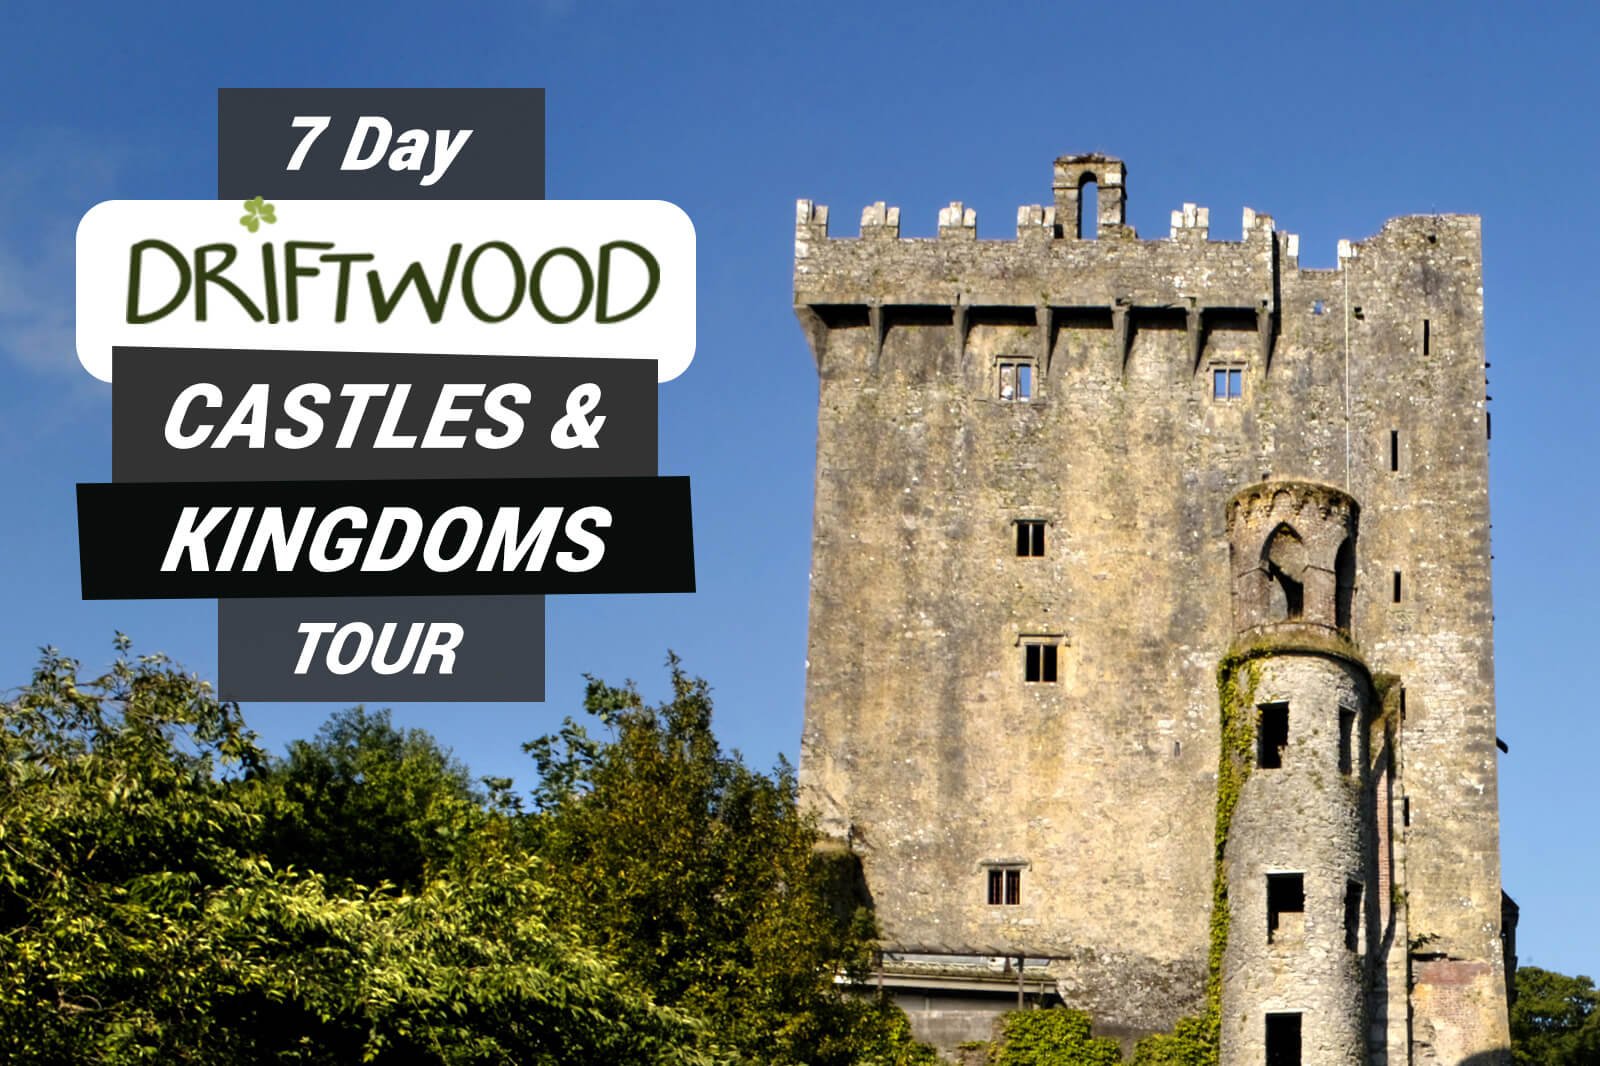 Blarney Castle in Ireland with graphic text for 7 Day Driftwood Castles & Kingdoms Tour overlaid